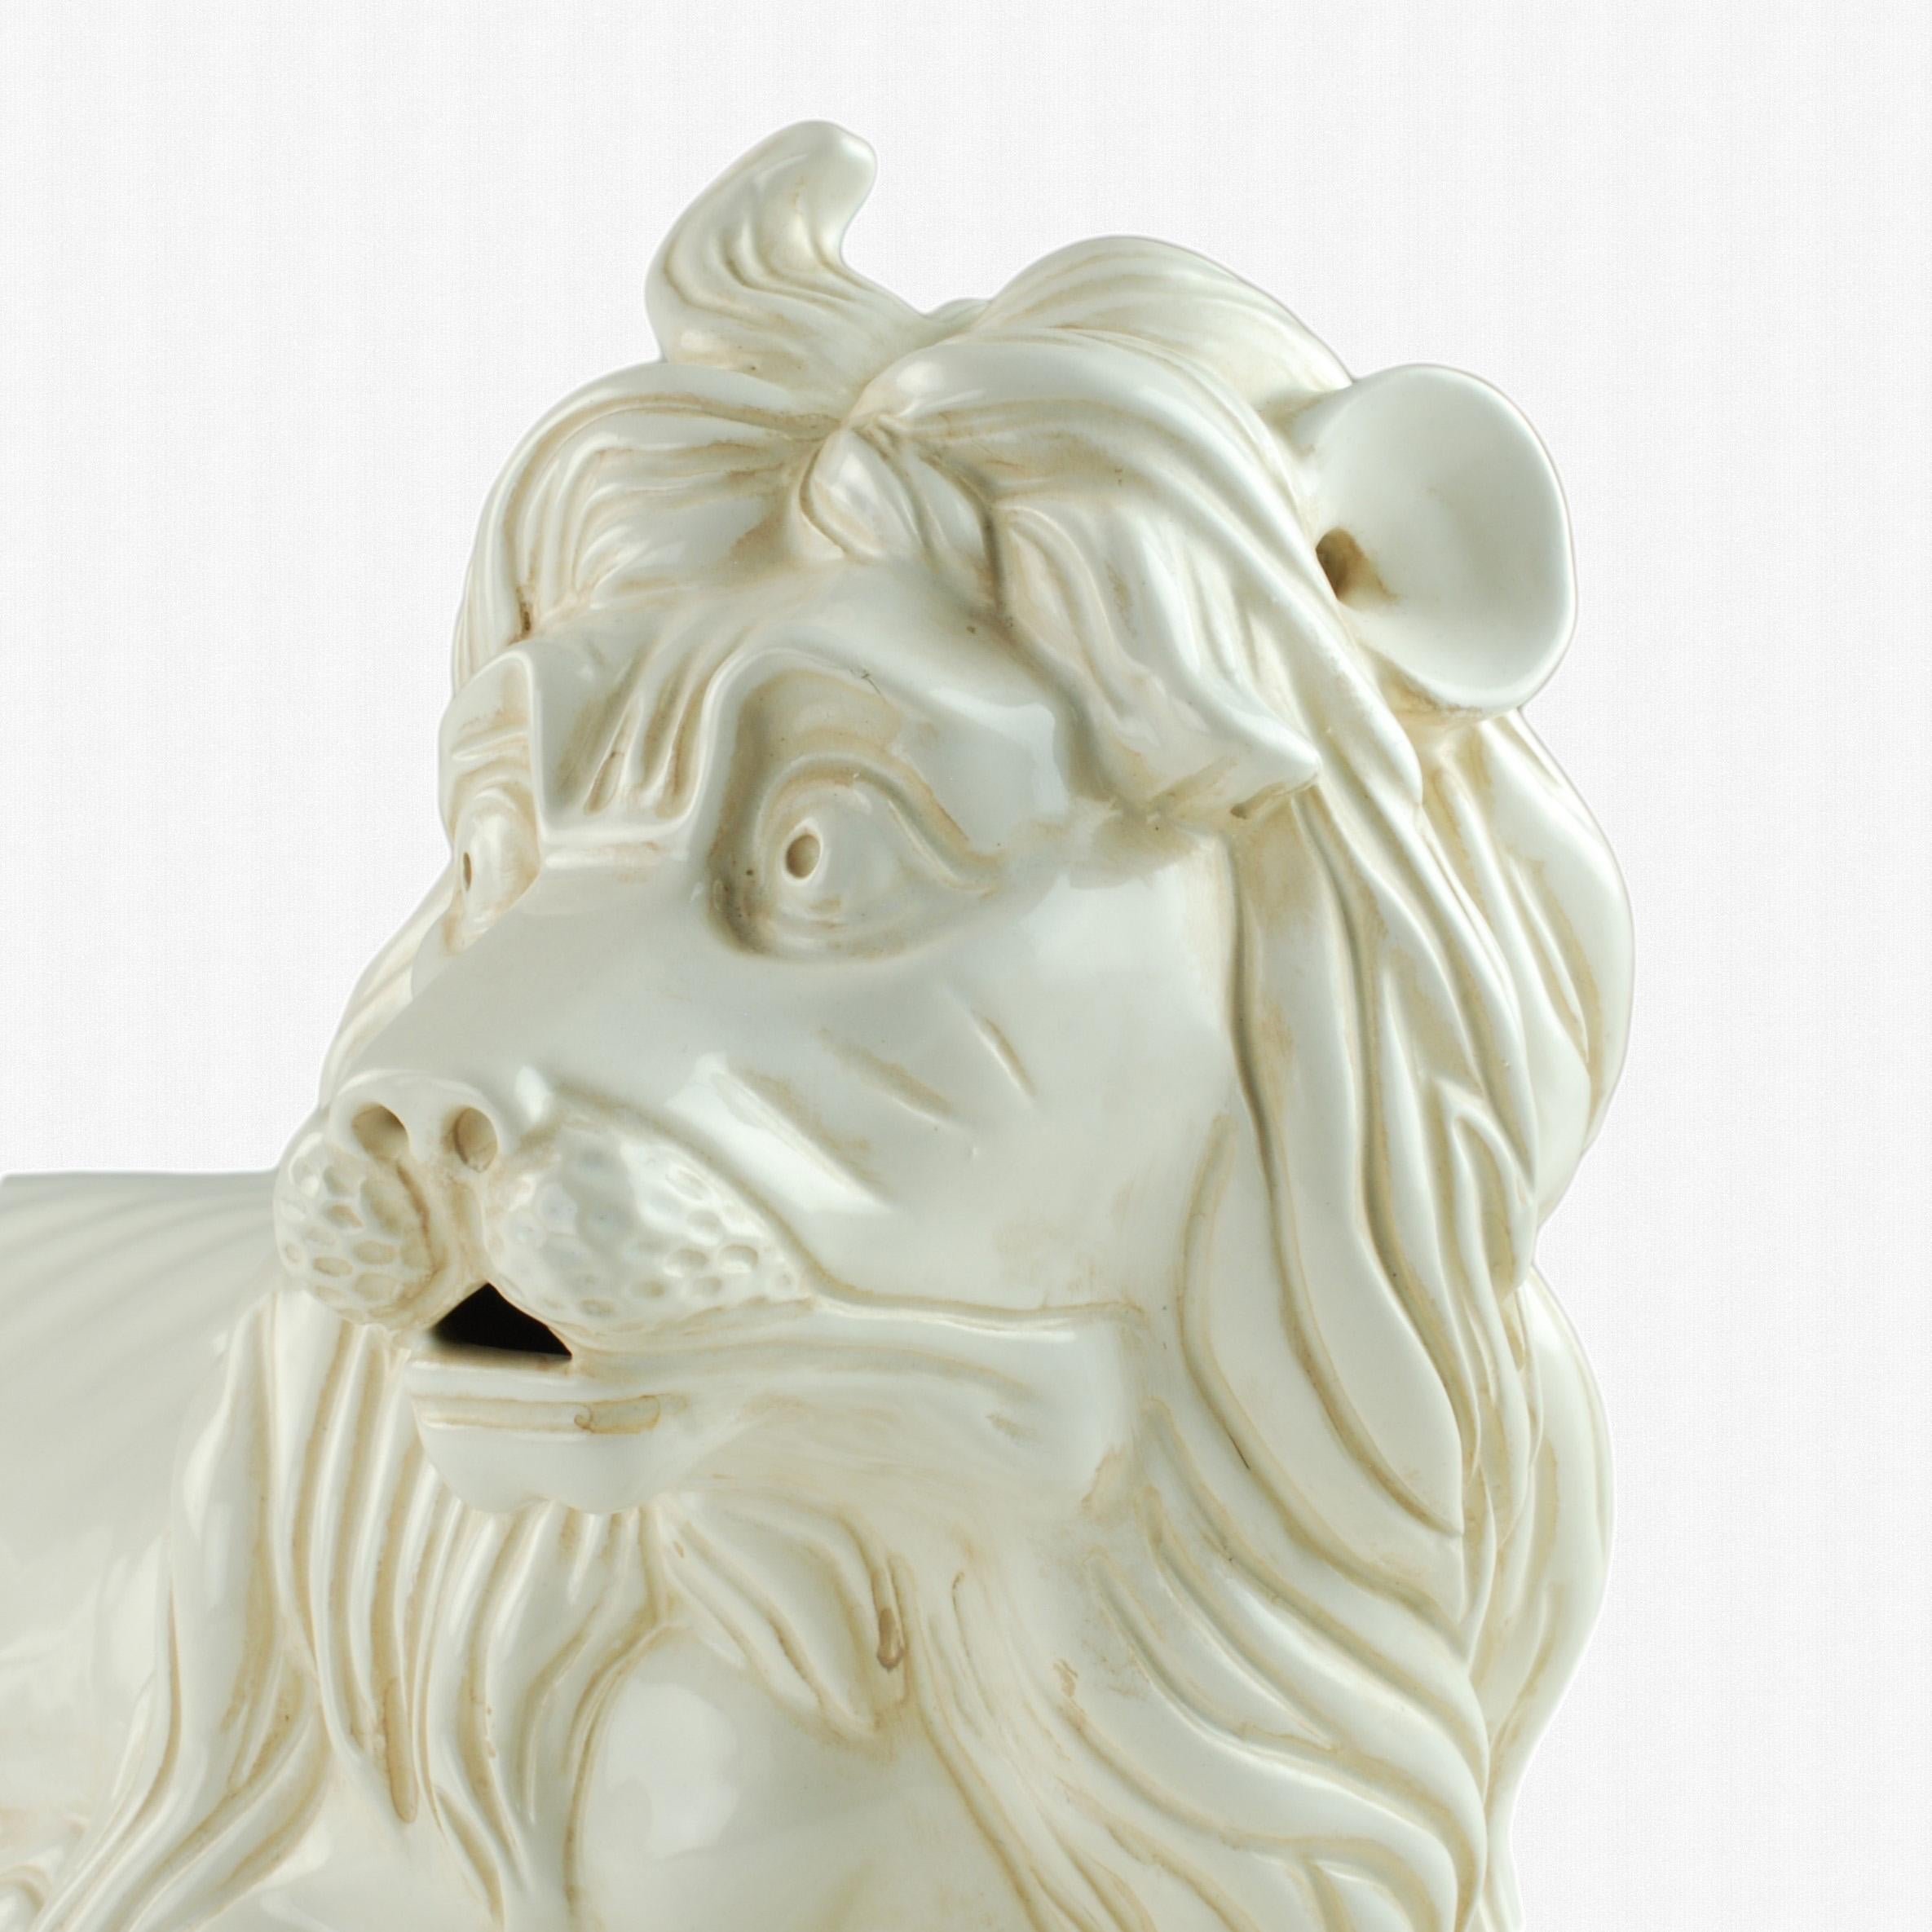 This large majolica lion figurine was made by Porcelain de Cuernavaca for the Mottahedeh company, known for their ceramic antique reproductions and historic designs. The design was originally executed in the early 18th century by head modeler for